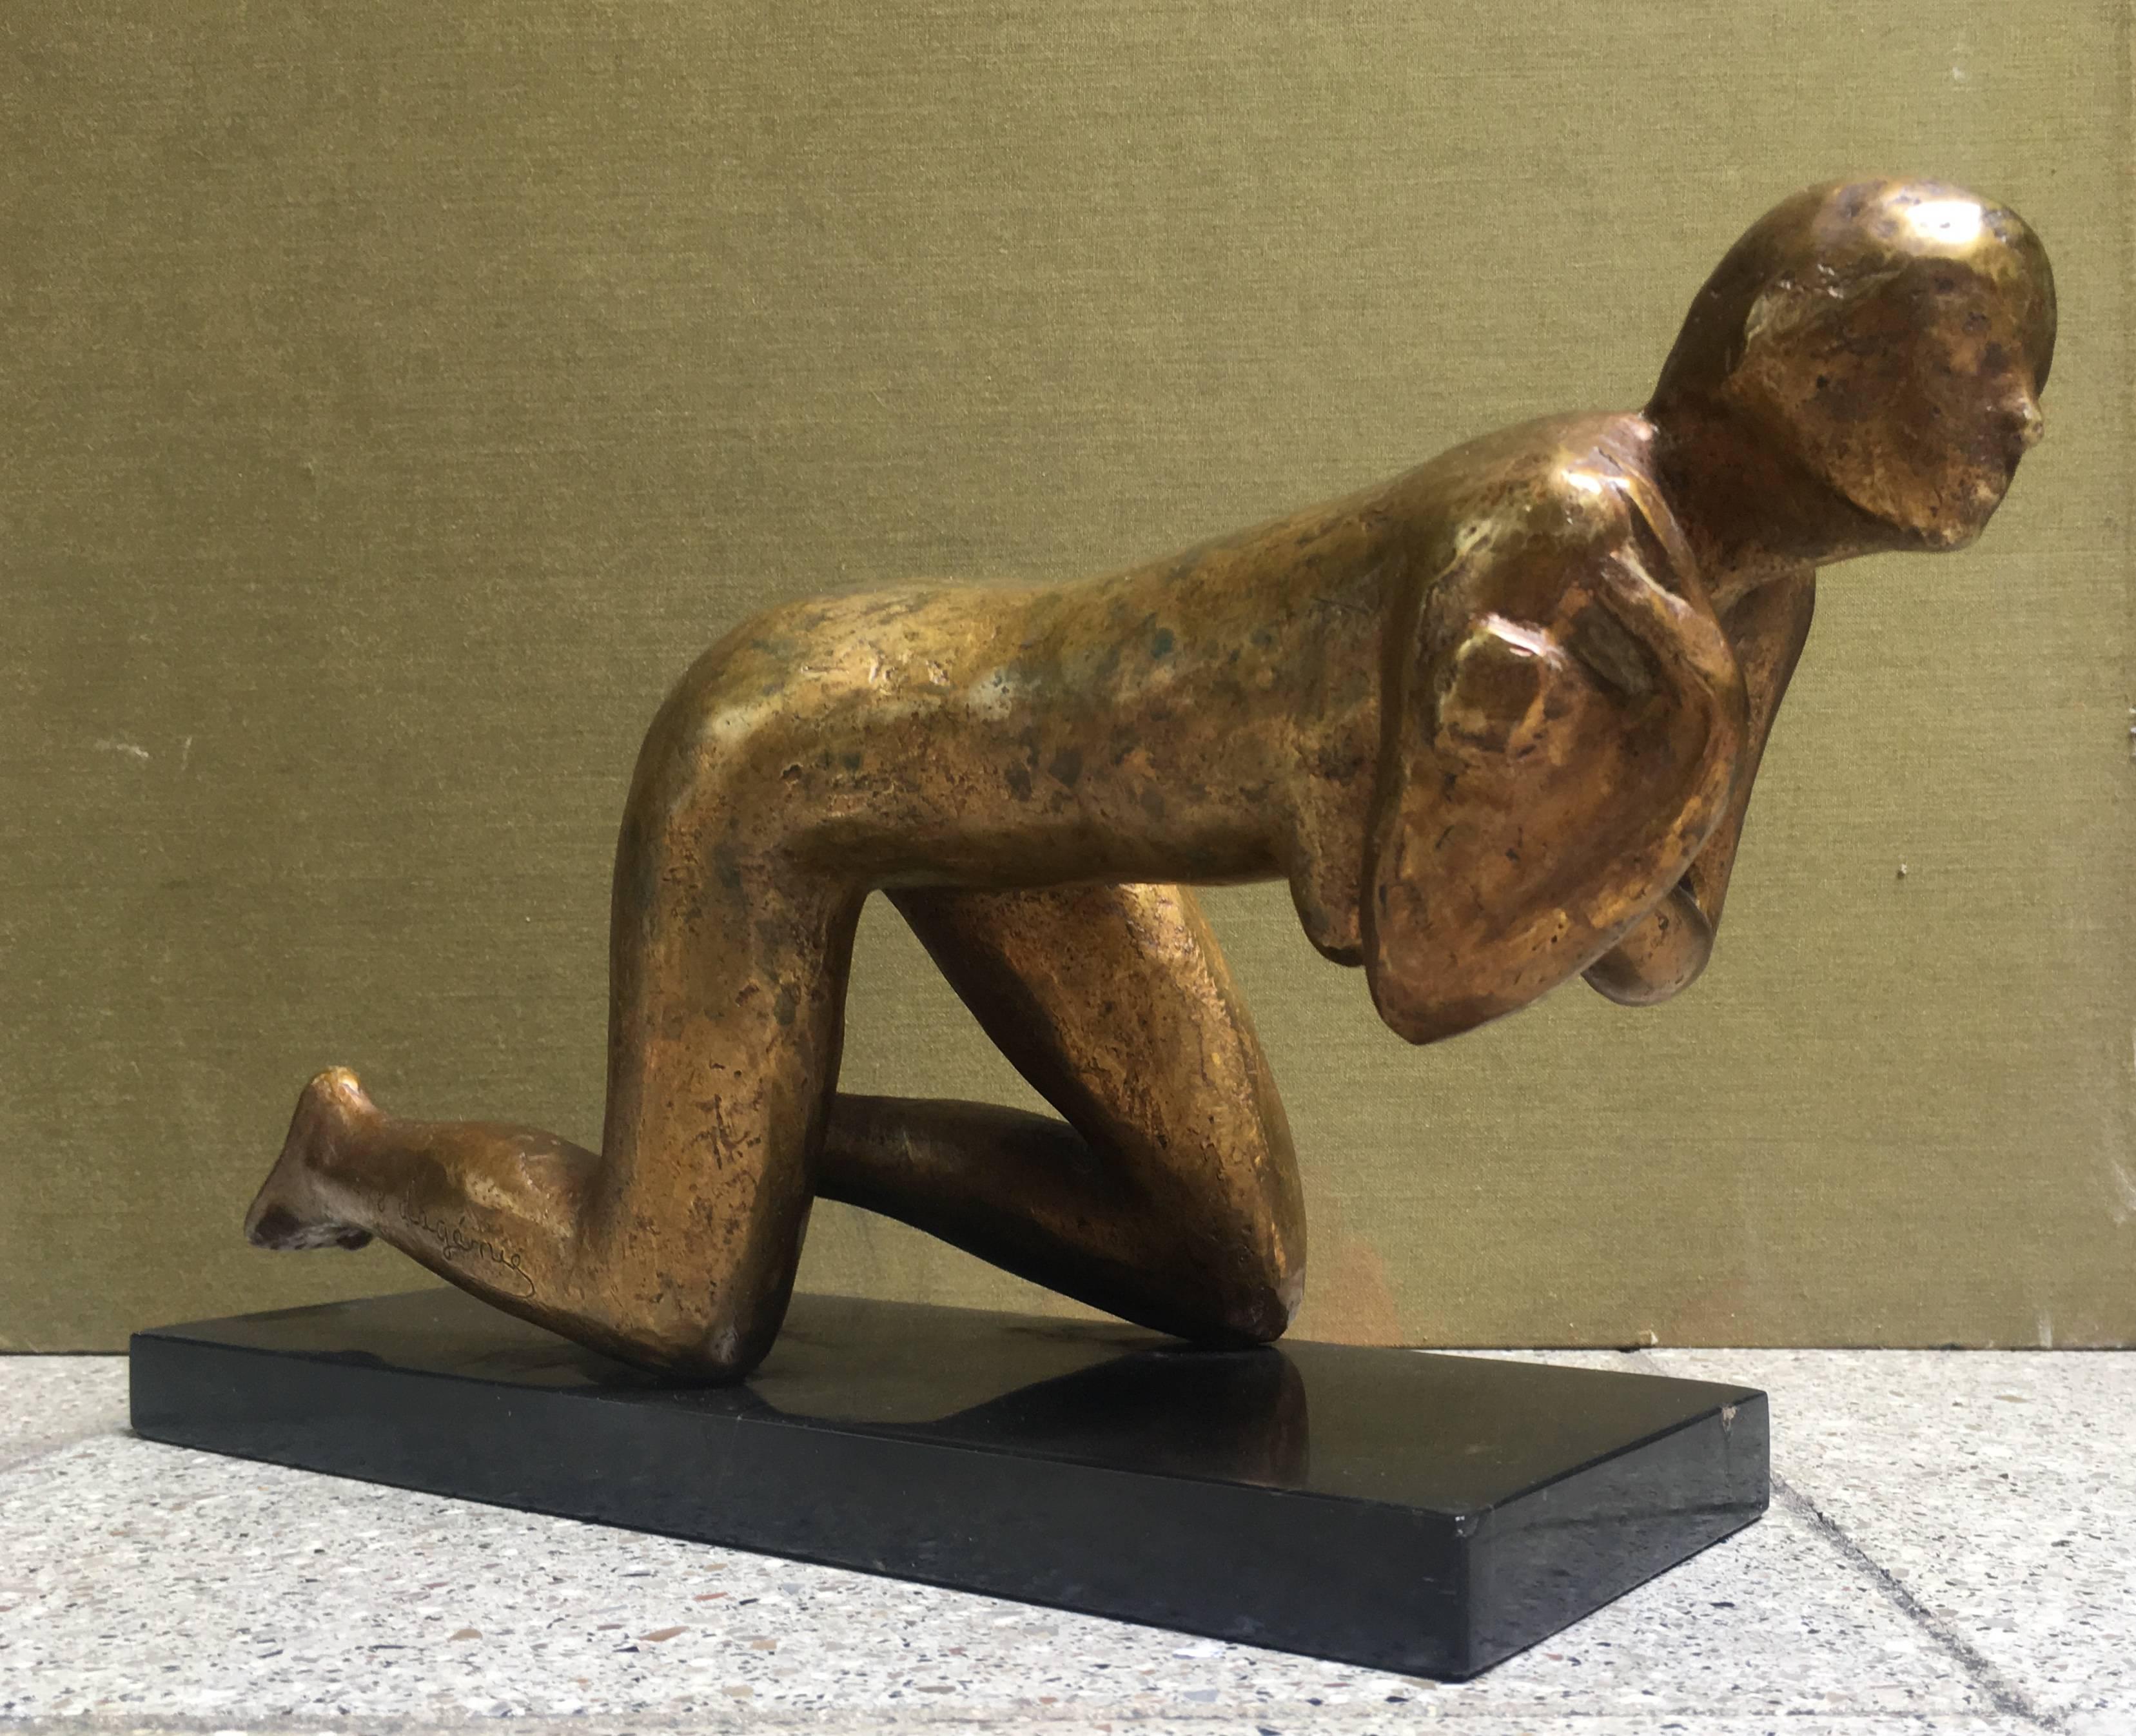 Pierre Lagenie (born in 1938) 
Bronze representing a kneeled woman.
Nuanced golden brown patina.
Belgium black marble.
Signed and numbered 2/8.
Dimensions: Length 33 cm, width 10.5 cm, height 18 cm.

Pierre Lagenie is a French sculptor who